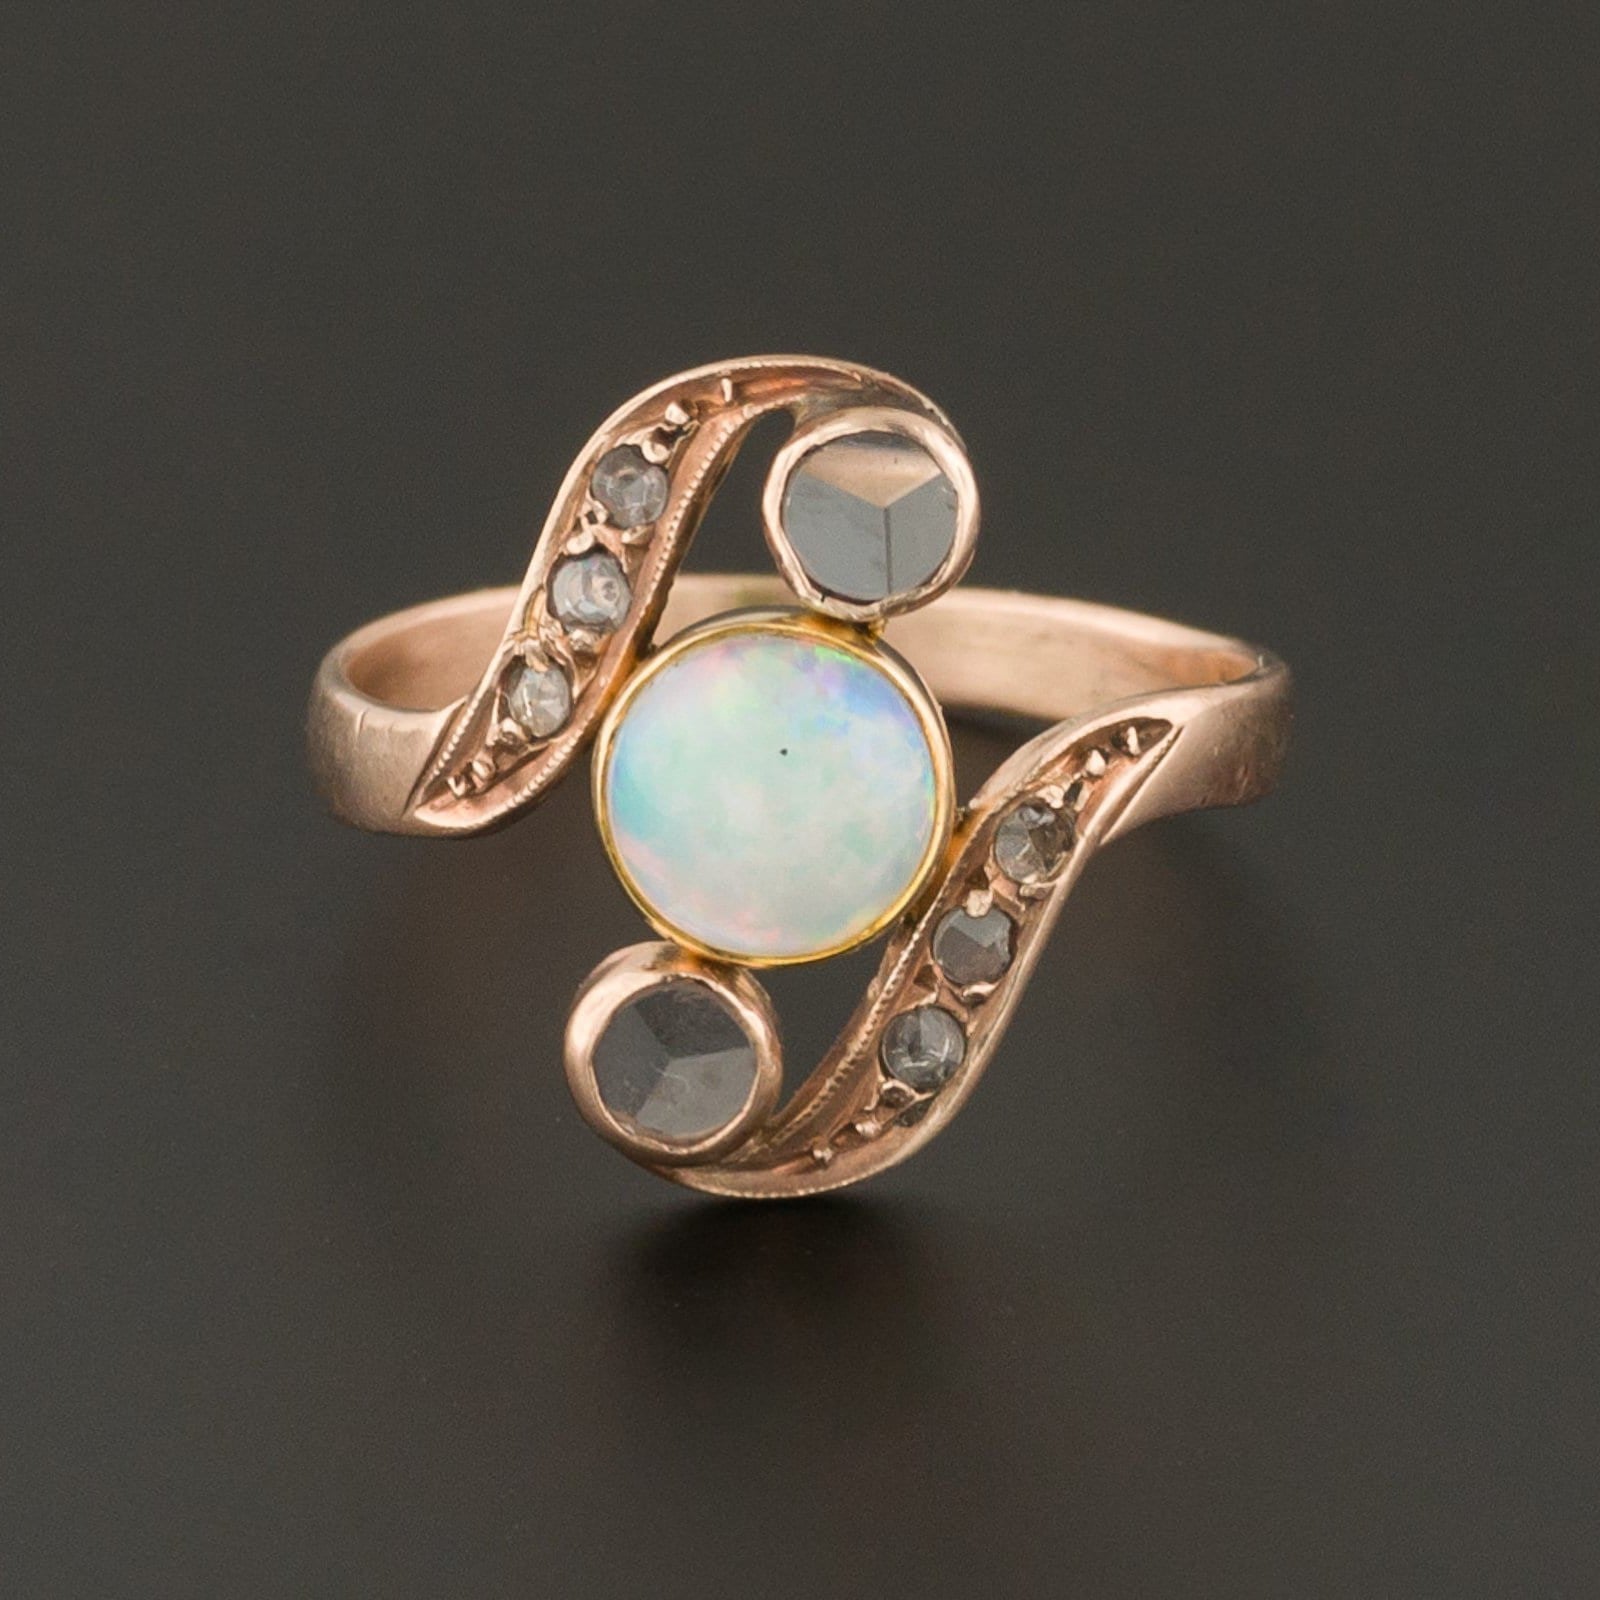 Antique Opal and Topaz Ring